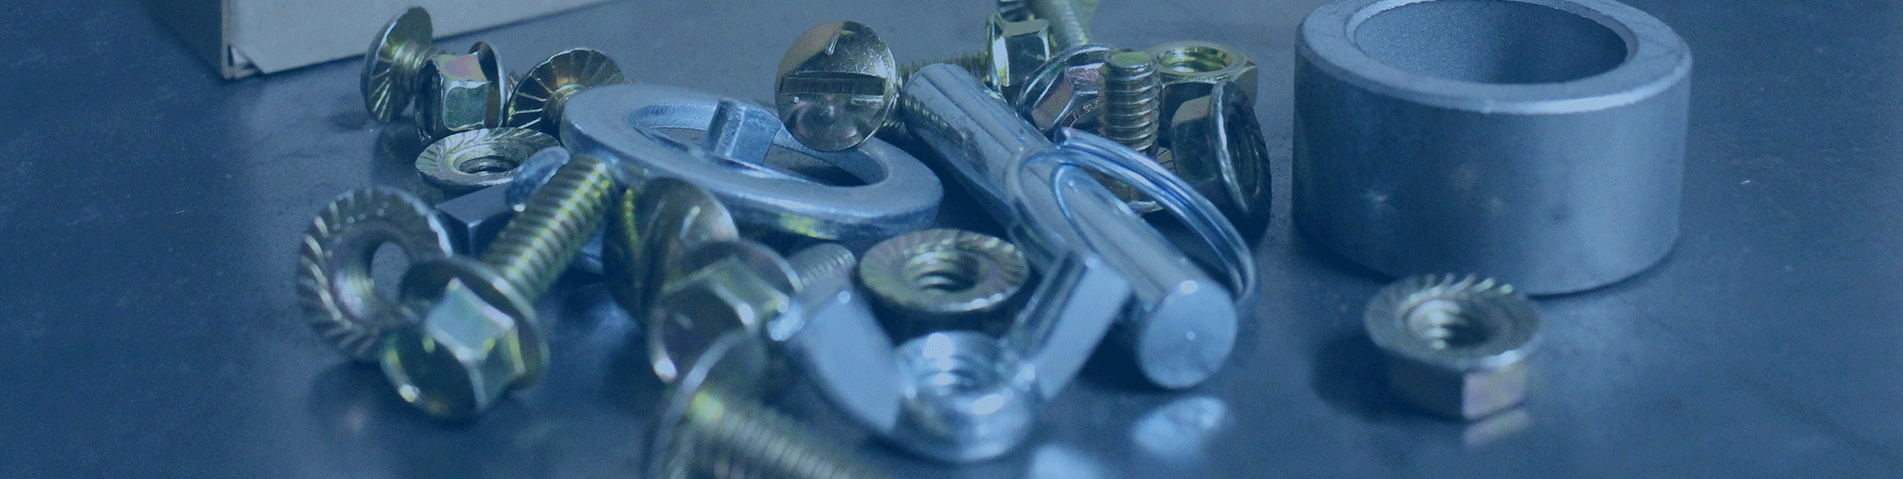 fasteners on a table